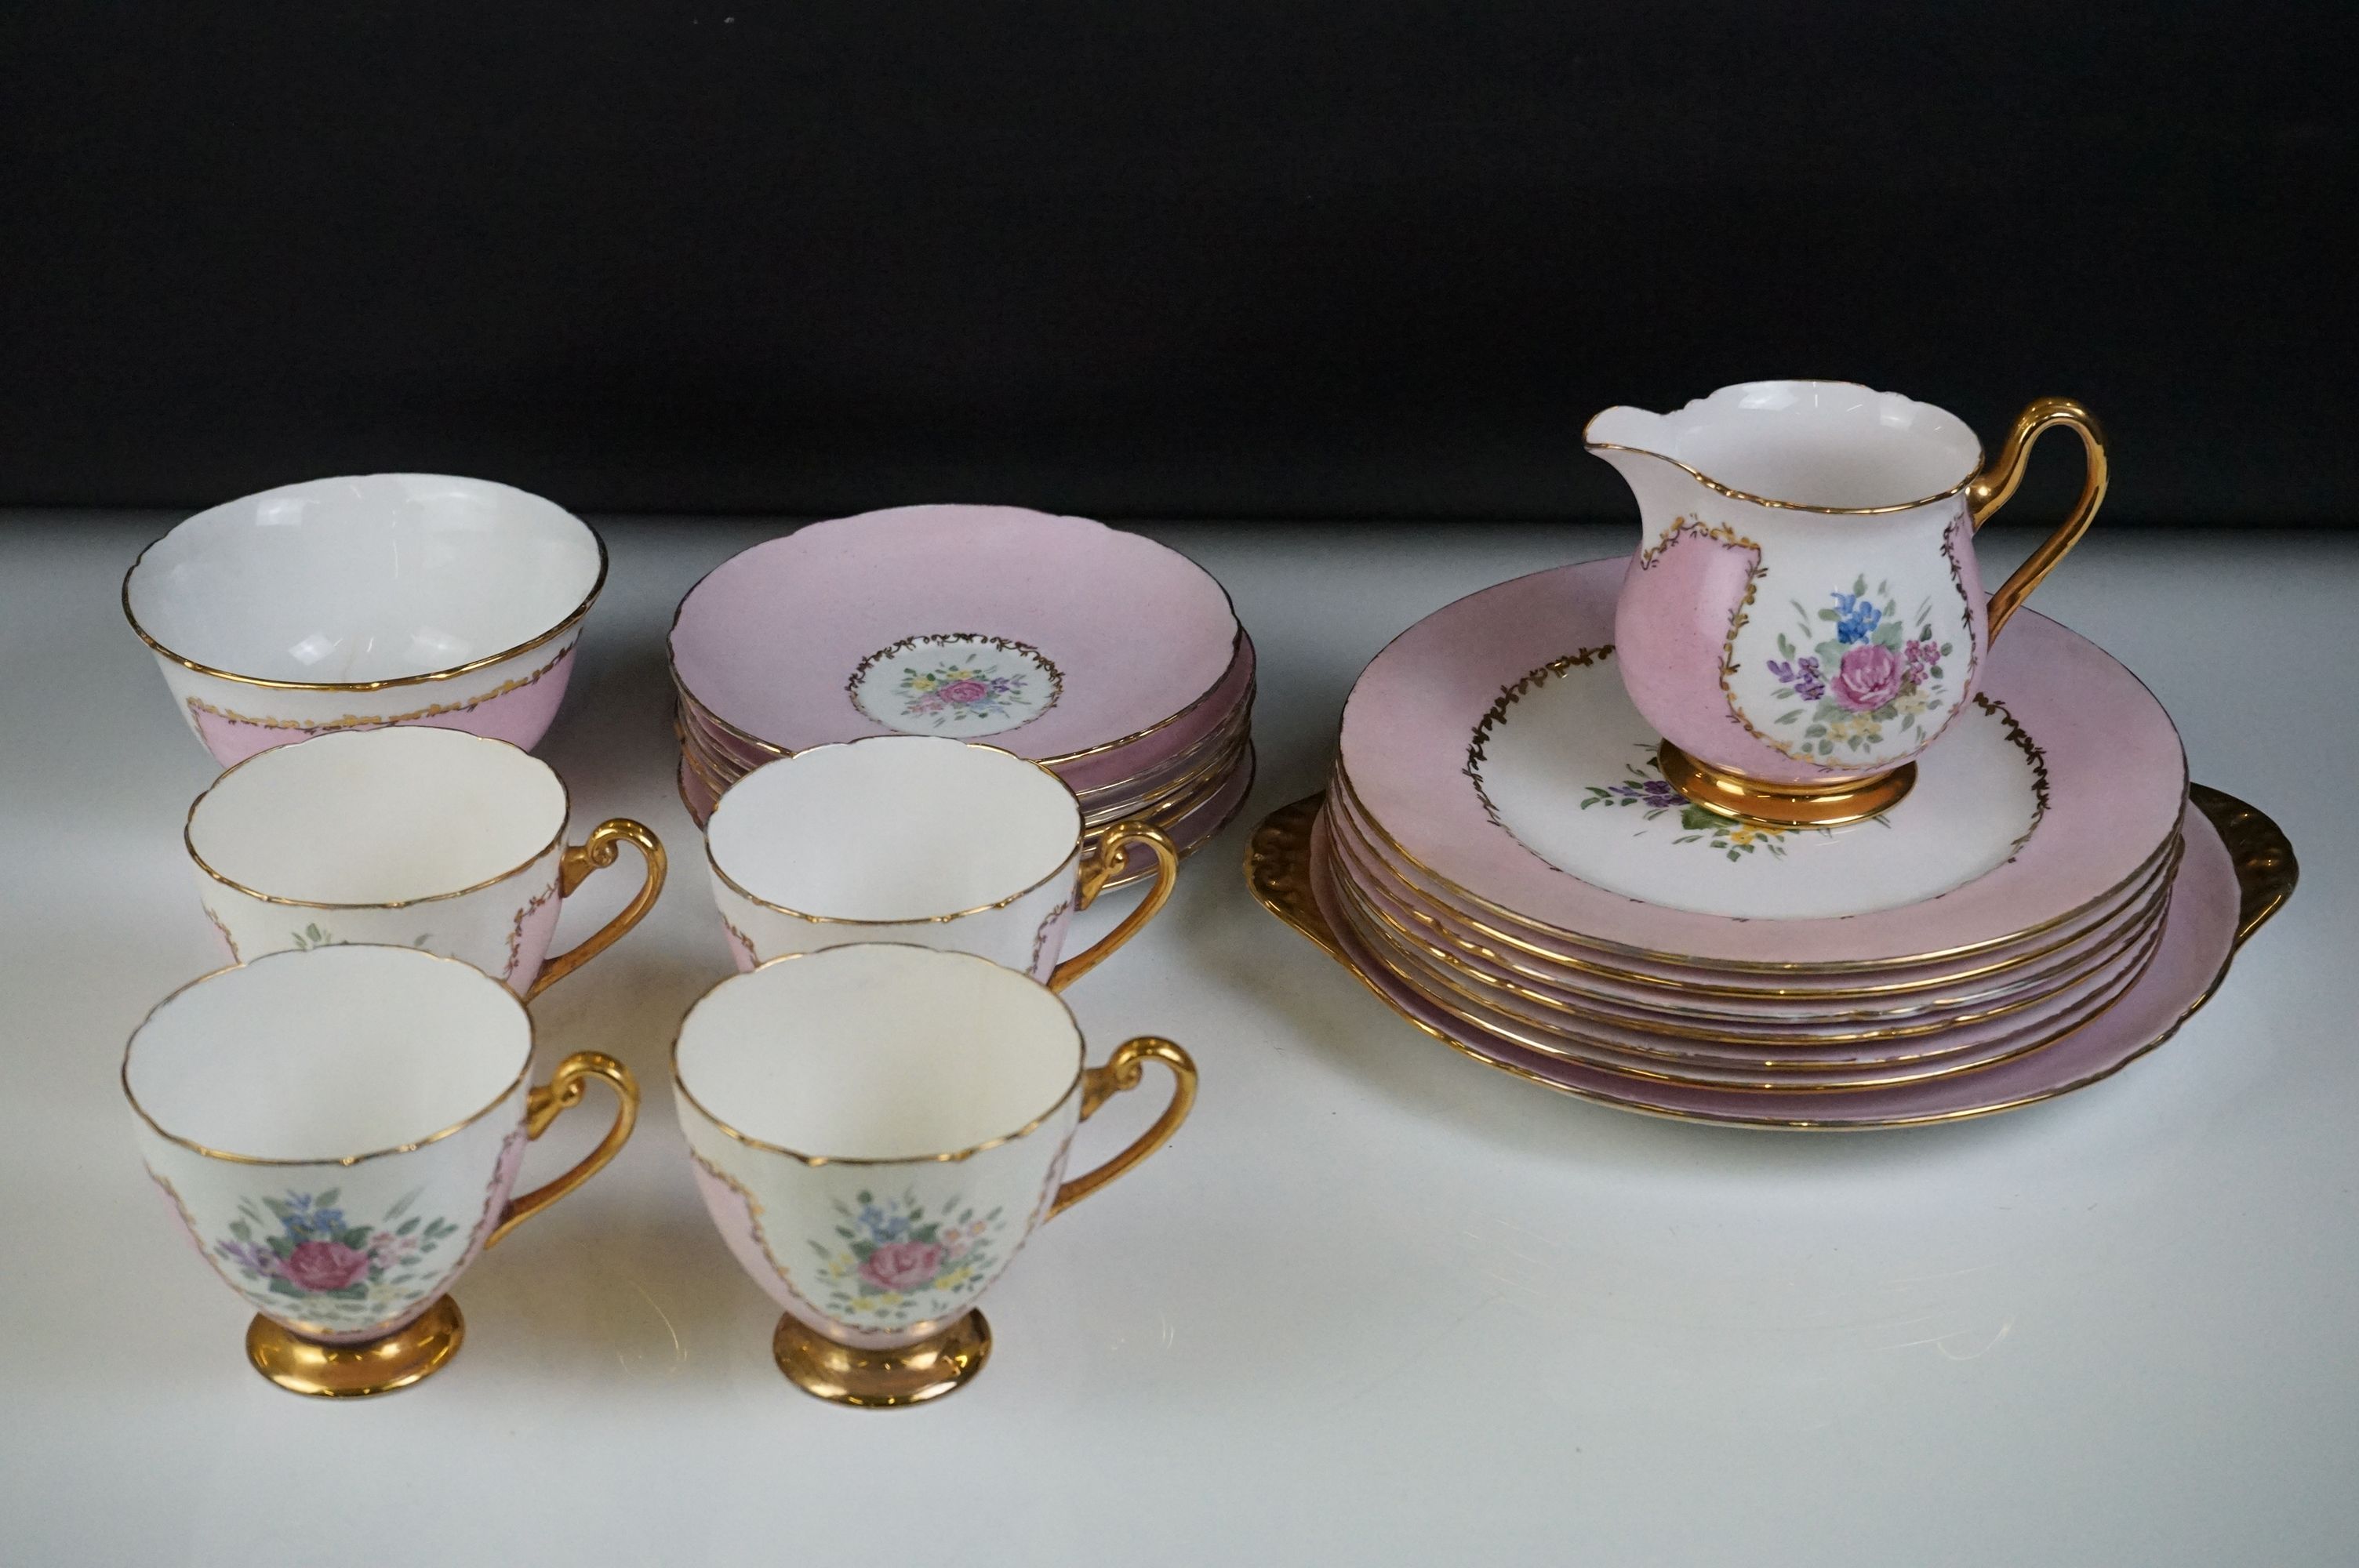 Early 20th Century Shelley hand painted floral tea ware on pink and white ground, with gilt